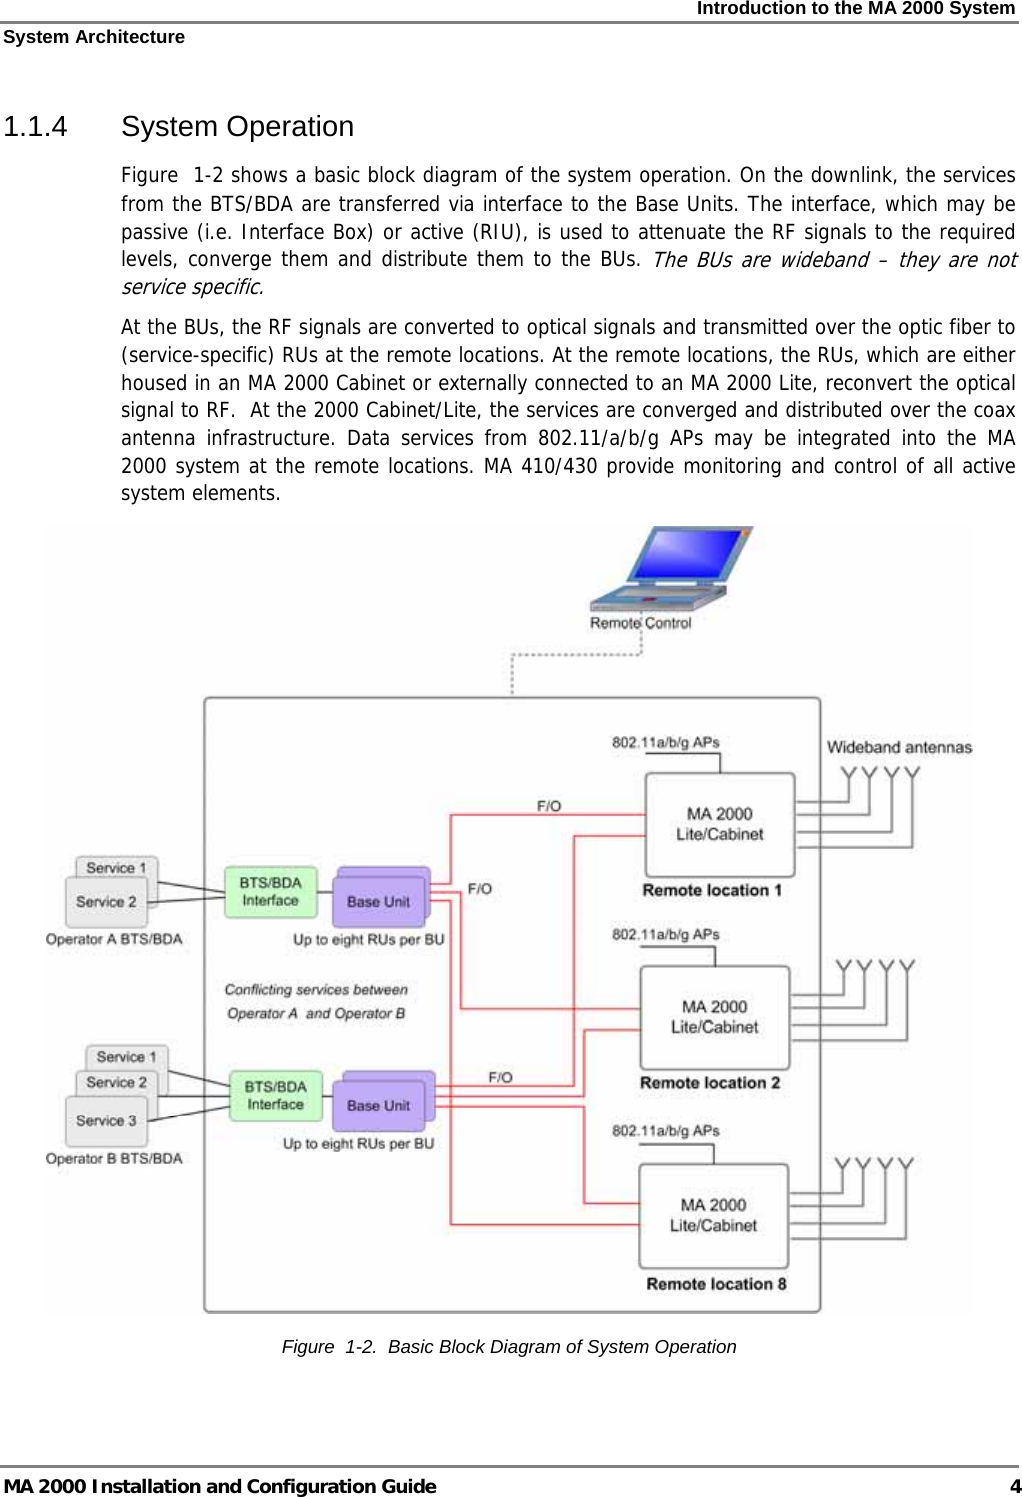 Introduction to the MA 2000 System System Architecture MA 2000 Installation and Configuration Guide  4 1.1.4  System Operation  Figure   1-2 shows a basic block diagram of the system operation. On the downlink, the services from the BTS/BDA are transferred via interface to the Base Units. The interface, which may be passive (i.e. Interface Box) or active (RIU), is used to attenuate the RF signals to the required levels, converge them and distribute them to the BUs. The BUs are wideband – they are not service specific.  At the BUs, the RF signals are converted to optical signals and transmitted over the optic fiber to (service-specific) RUs at the remote locations. At the remote locations, the RUs, which are either housed in an MA 2000 Cabinet or externally connected to an MA 2000 Lite, reconvert the optical signal to RF.  At the 2000 Cabinet/Lite, the services are converged and distributed over the coax antenna infrastructure. Data services from 802.11/a/b/g APs may be integrated into the MA 2000 system at the remote locations. MA 410/430 provide monitoring and control of all active system elements.  Figure   1-2.  Basic Block Diagram of System Operation 